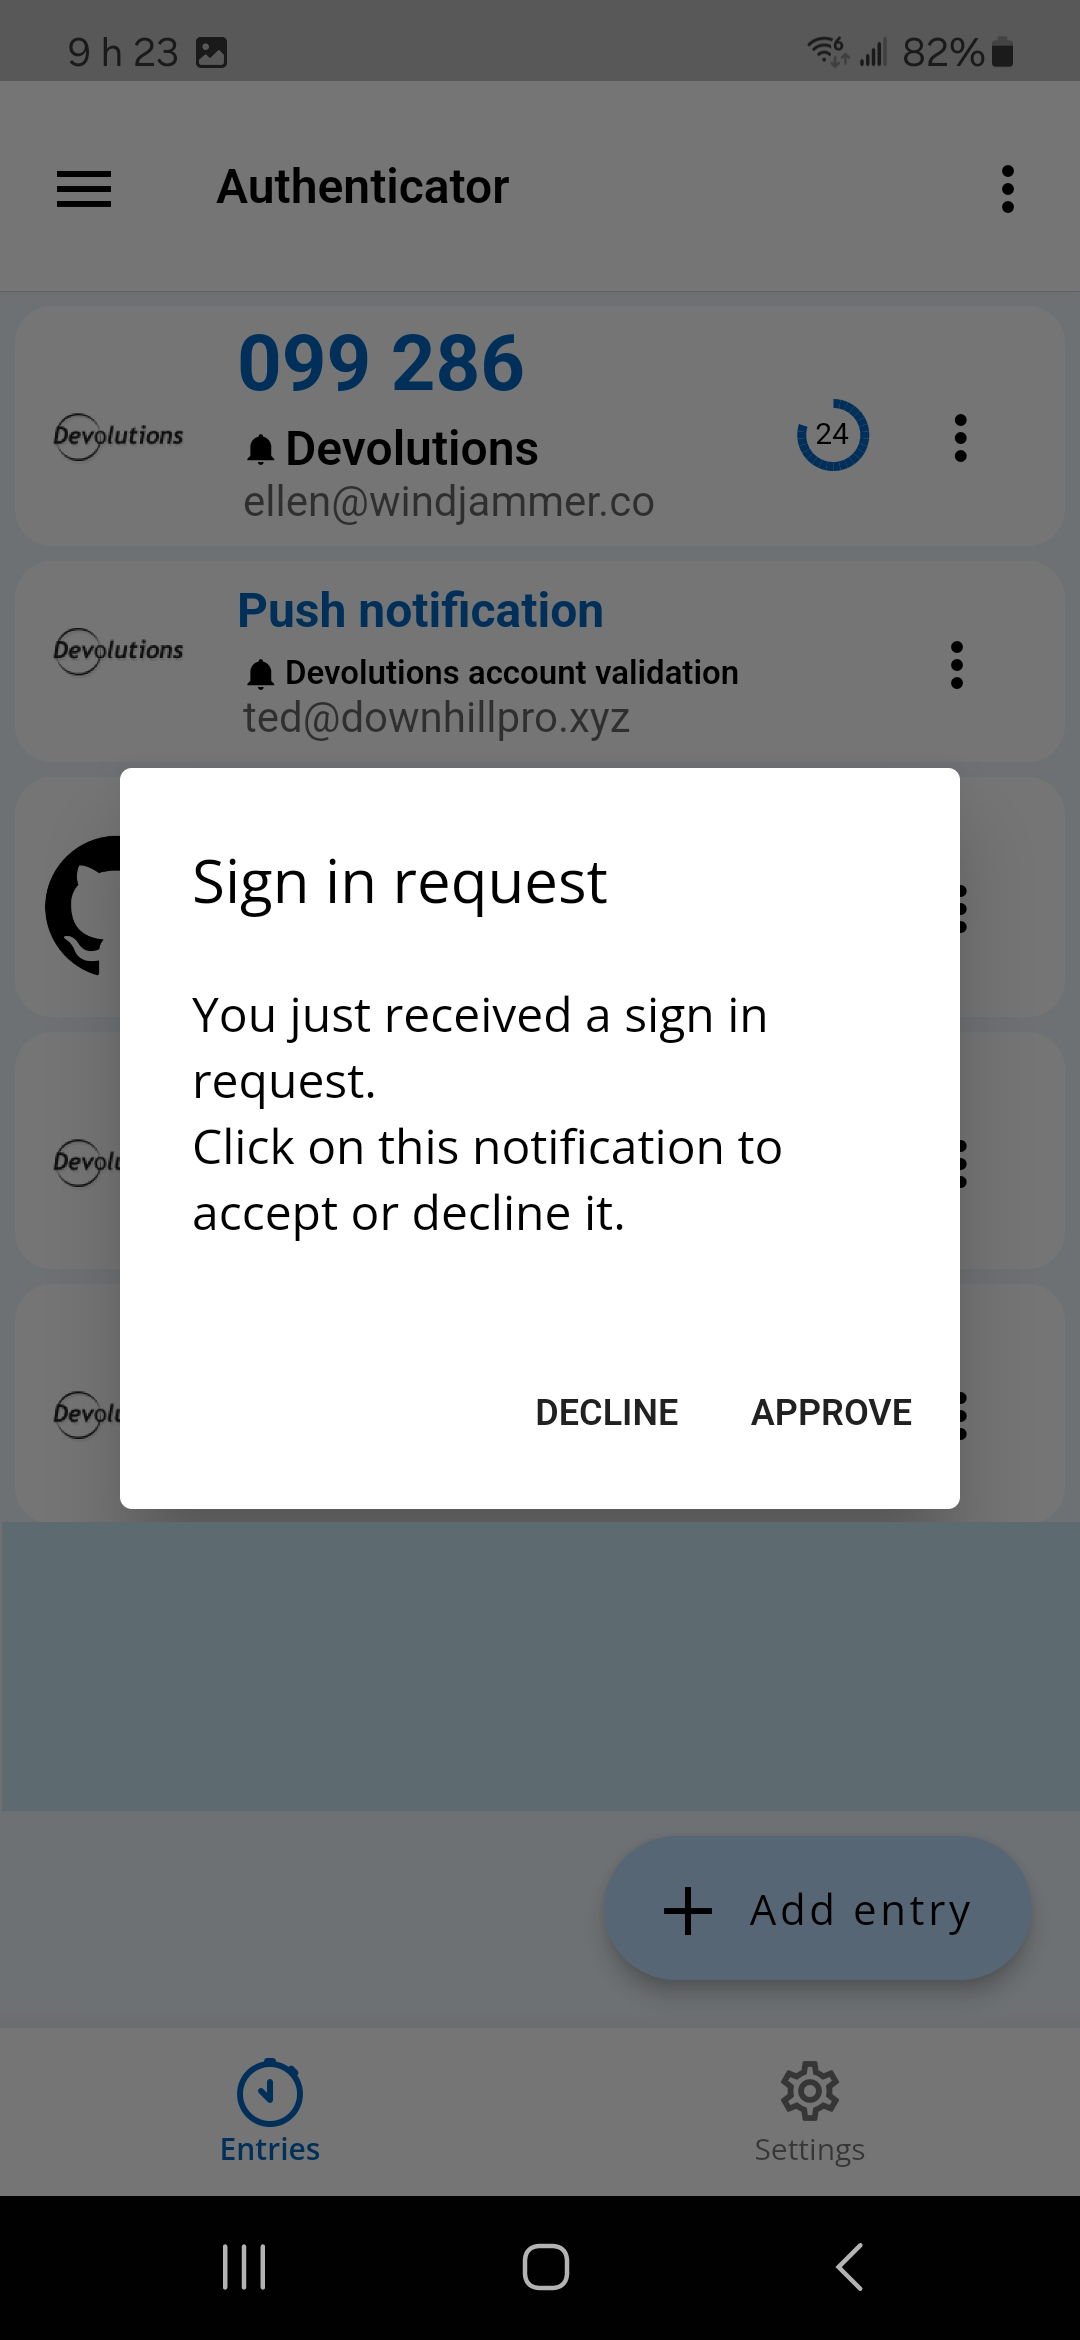 Authenticate accounts with OTP and Push notification